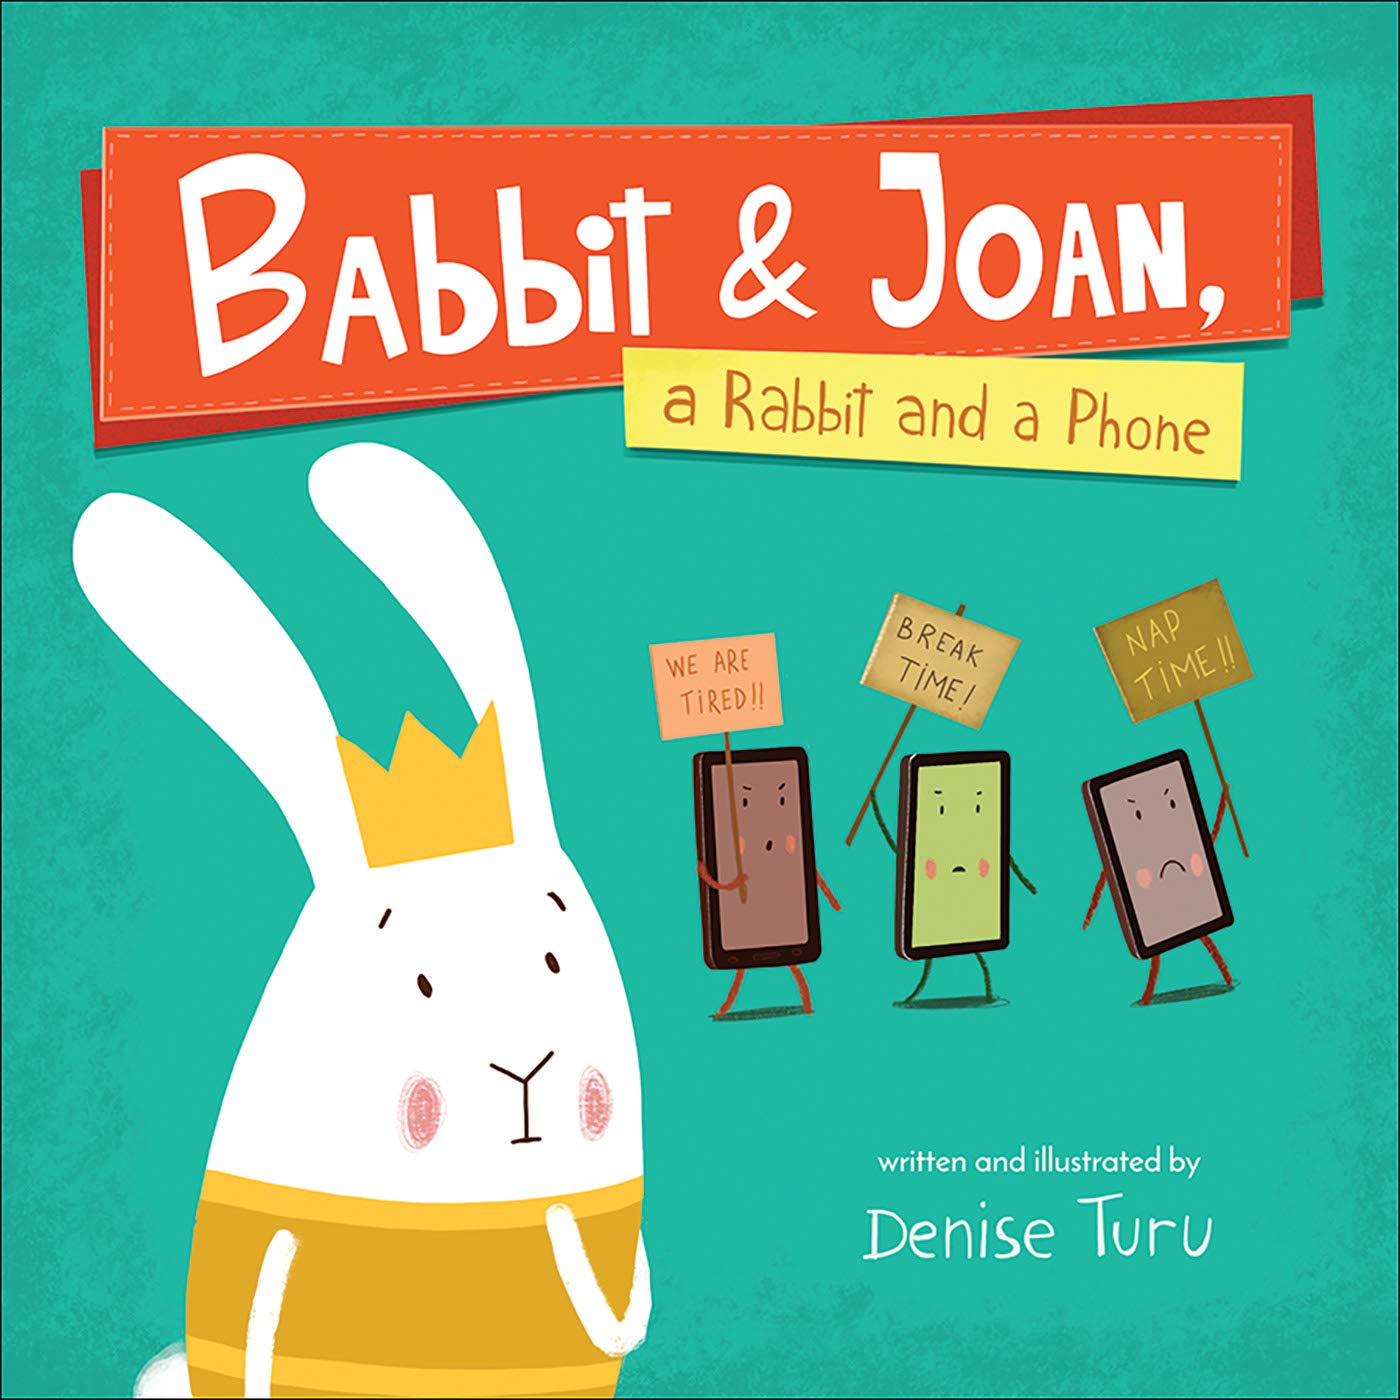 Babbit and Joan, a Rabbit and a Phone